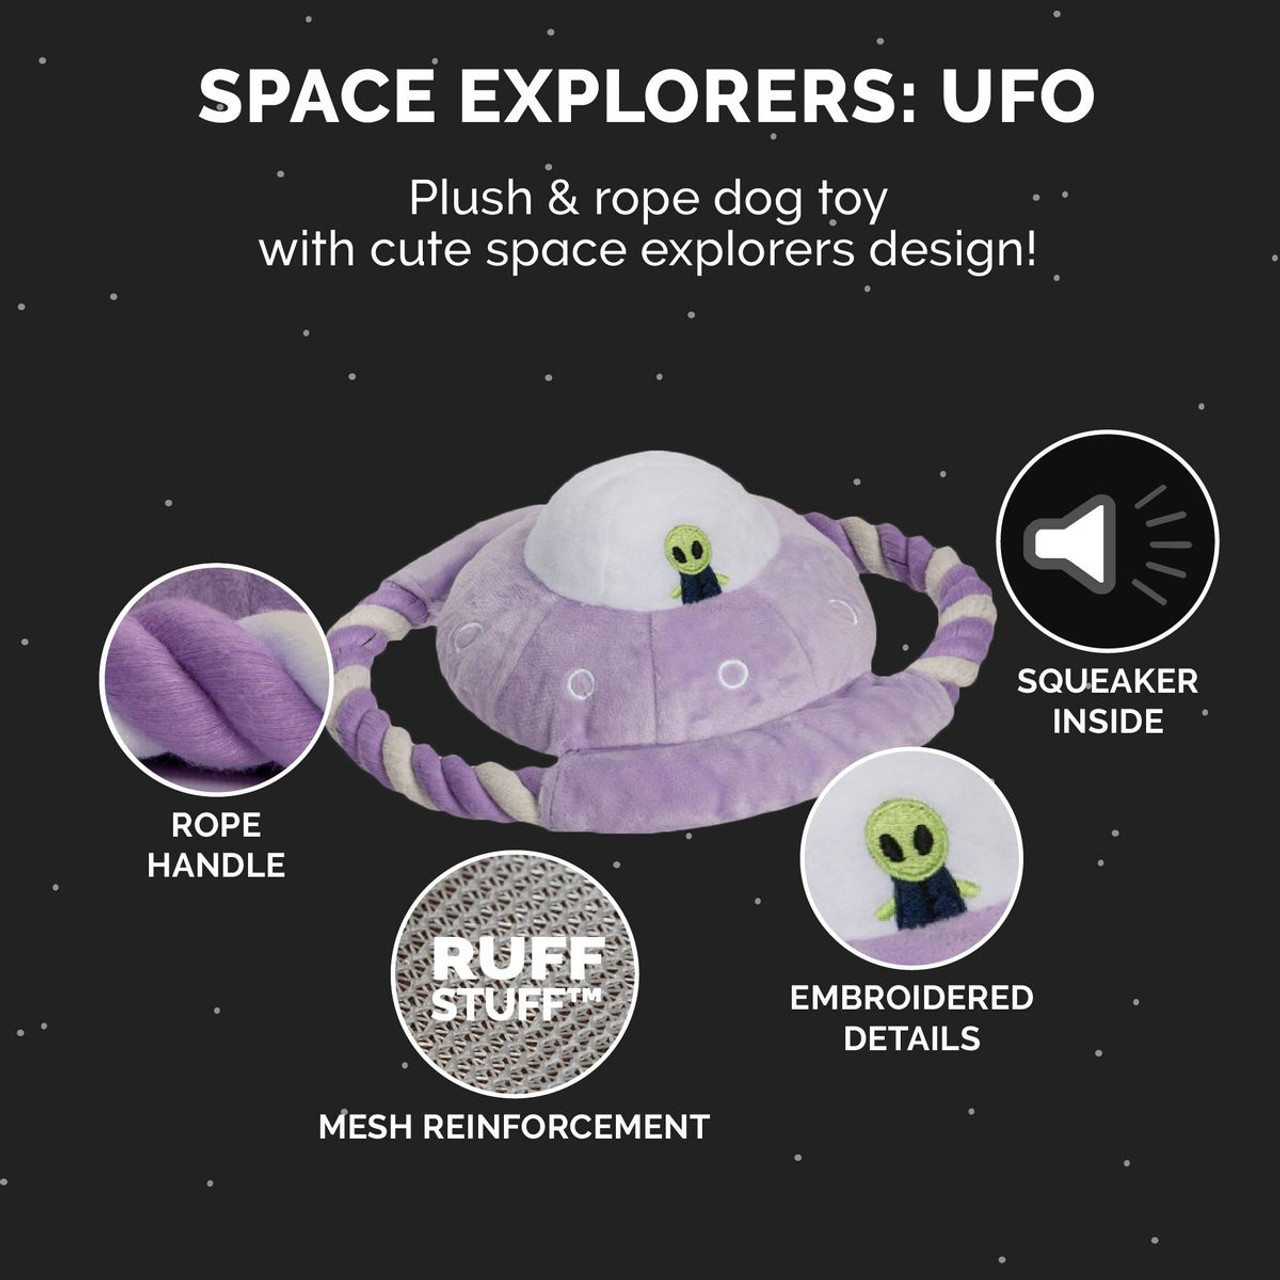 UFO Space Explorers Plush and Rope Dog Toy product image